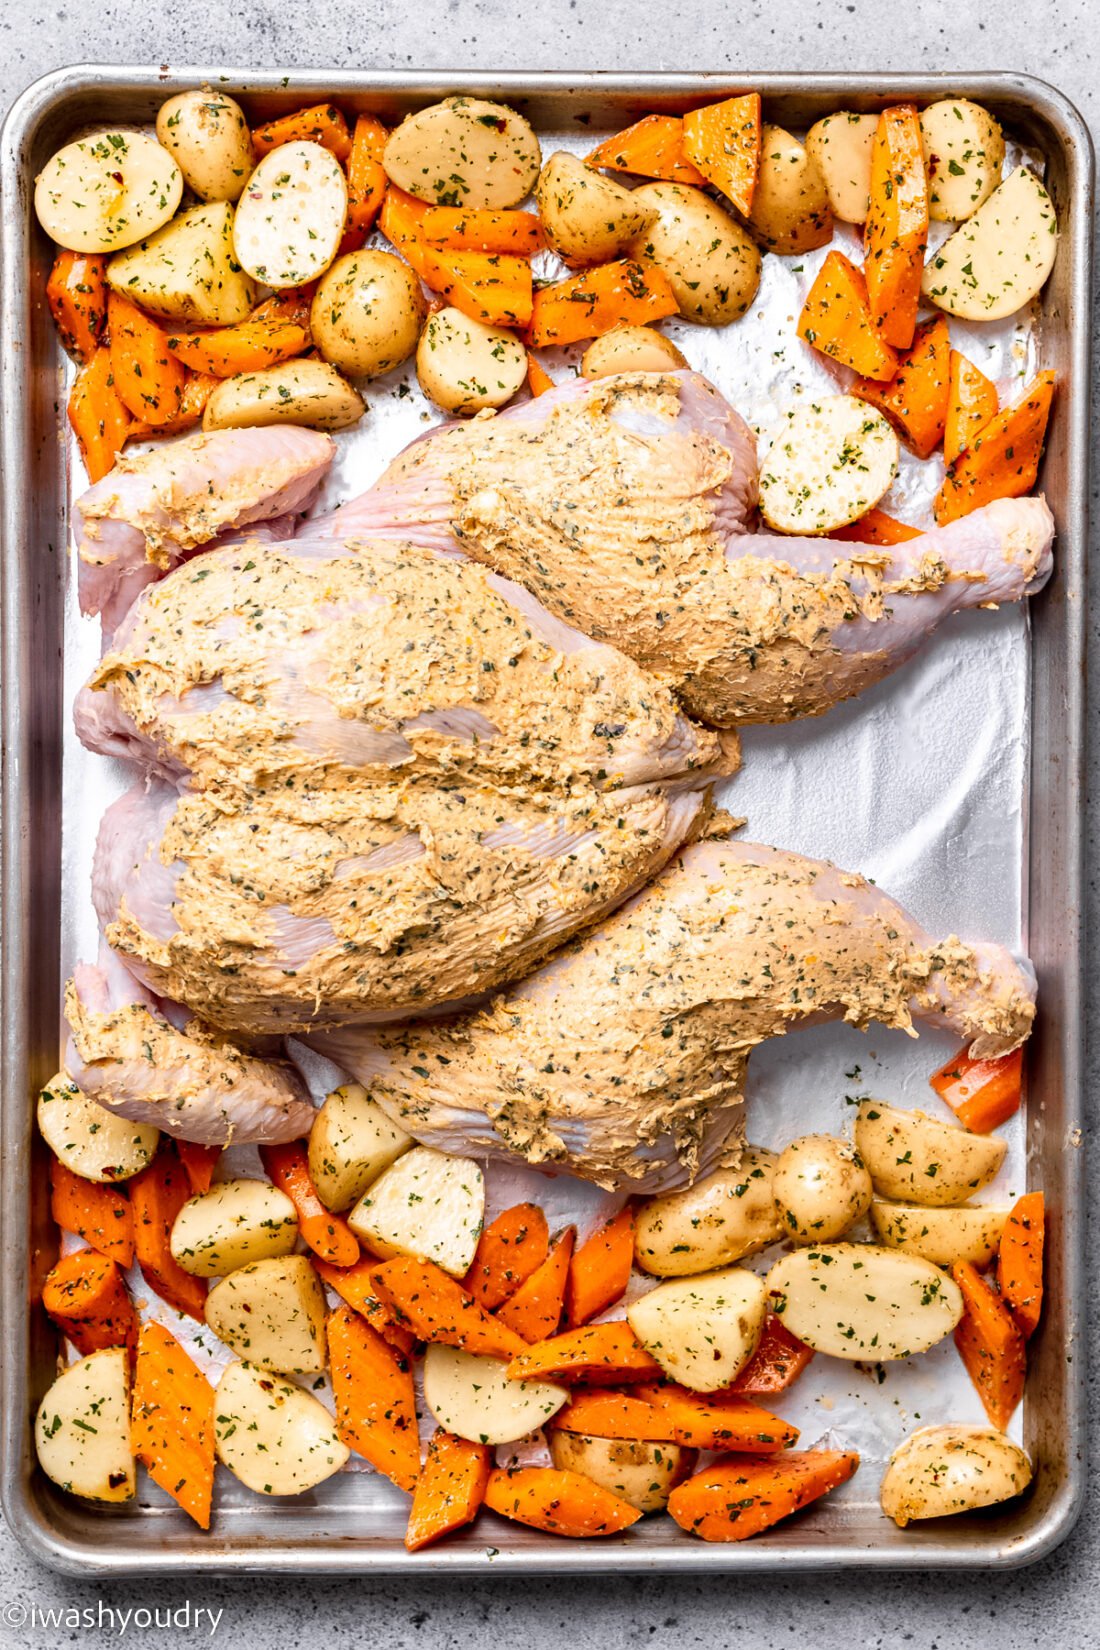 Raw Spatchcock chicken with vegetables on baking sheet. 